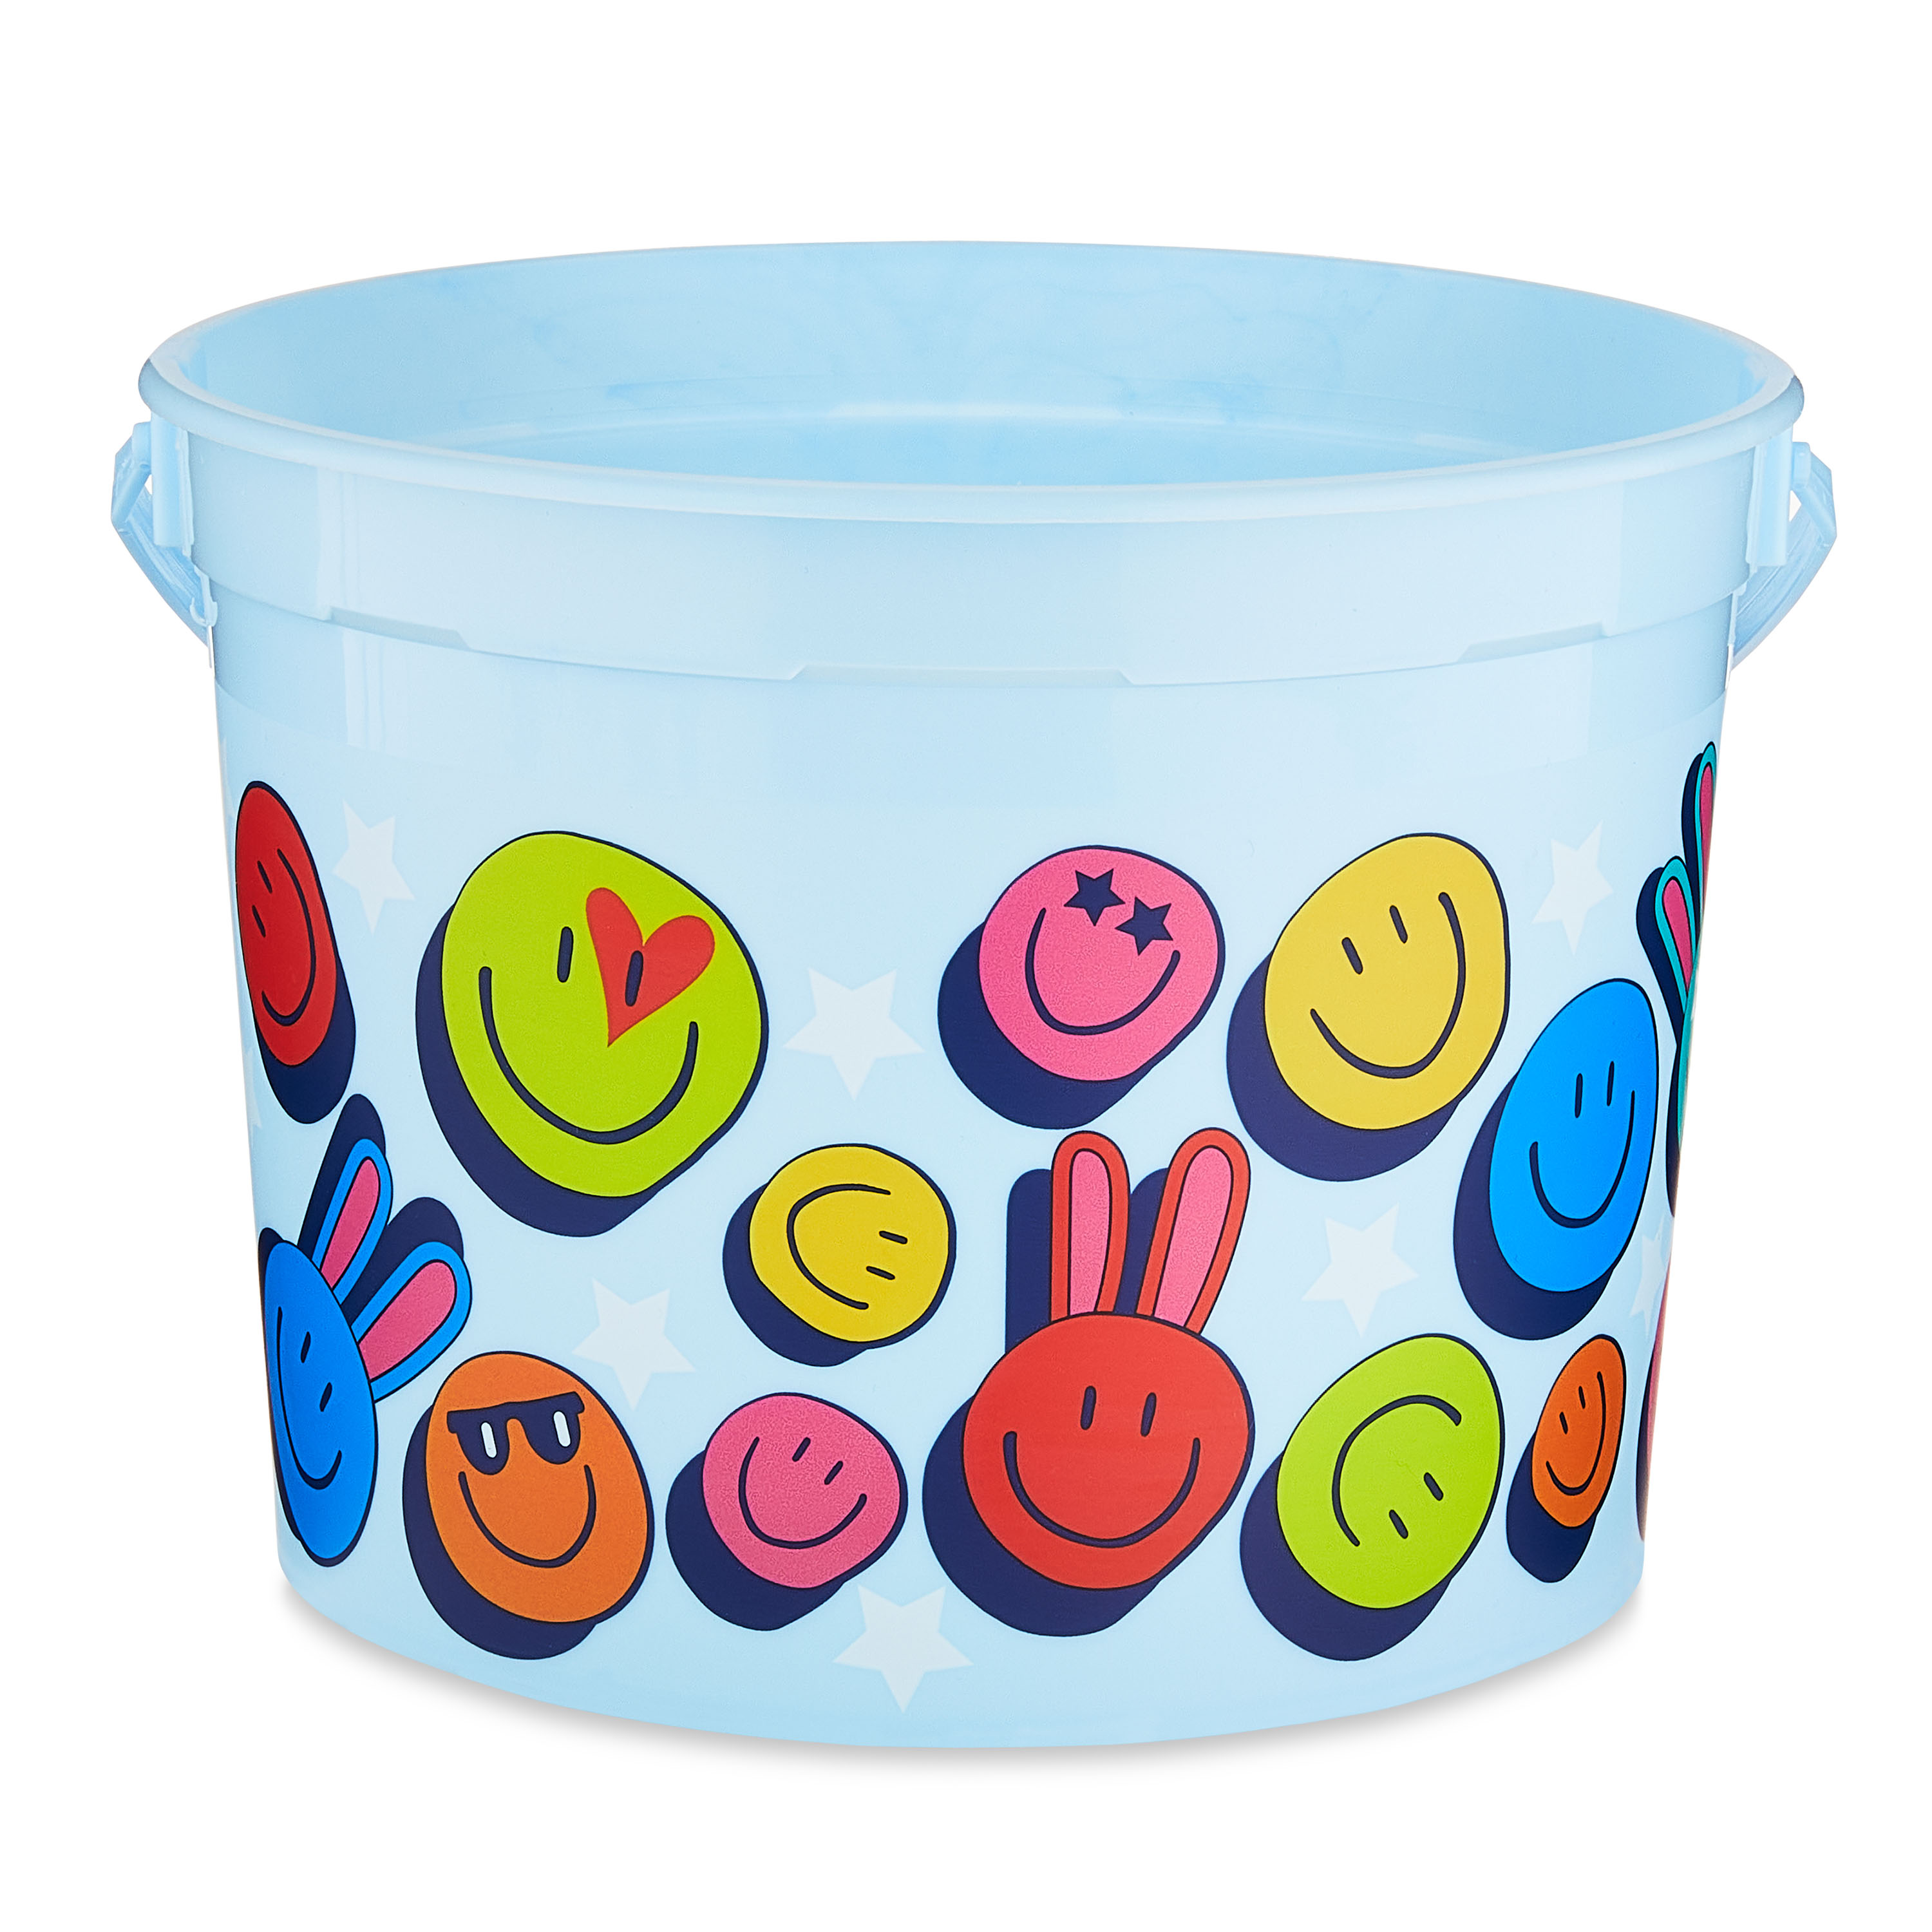 Pink & Red 5-Quart Plastic Easter Bucket, Strawberries, by Way To Celebrate - image 4 of 5